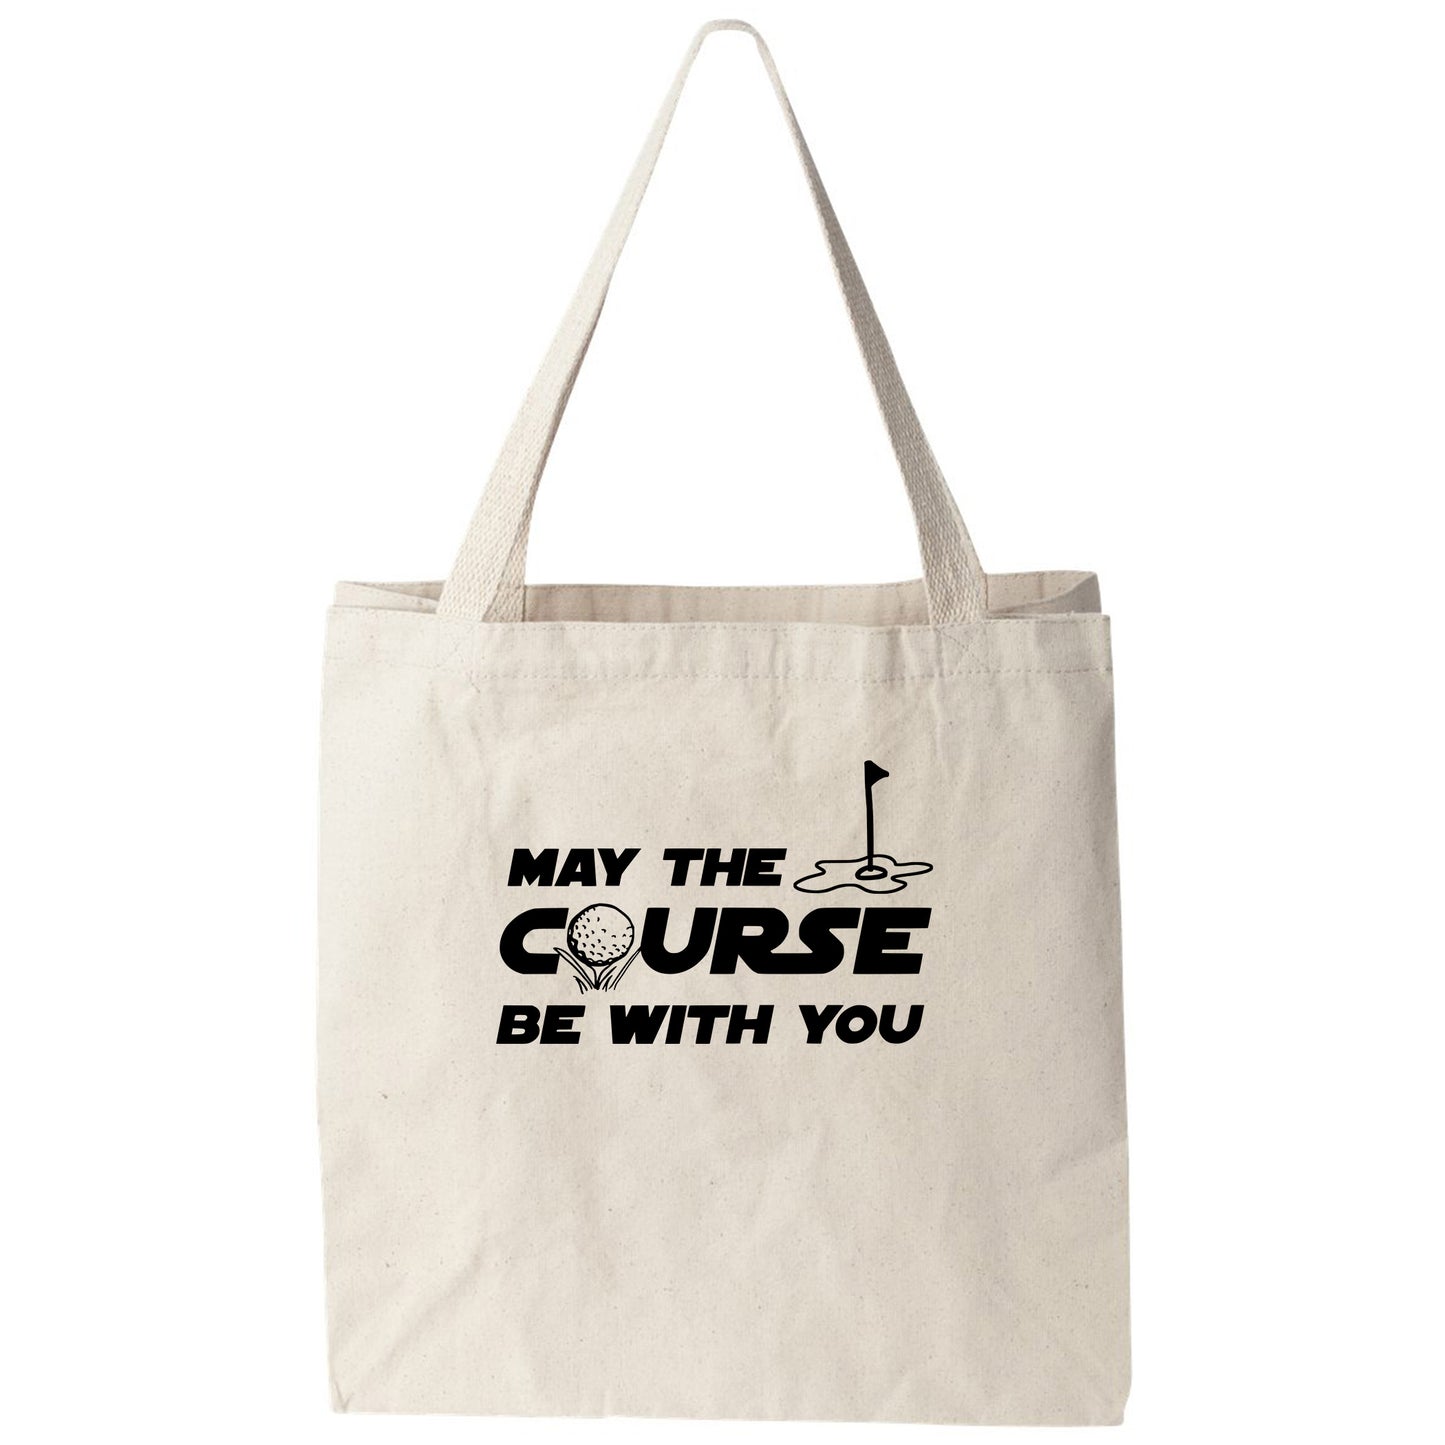 a tote bag that says may the course be with you